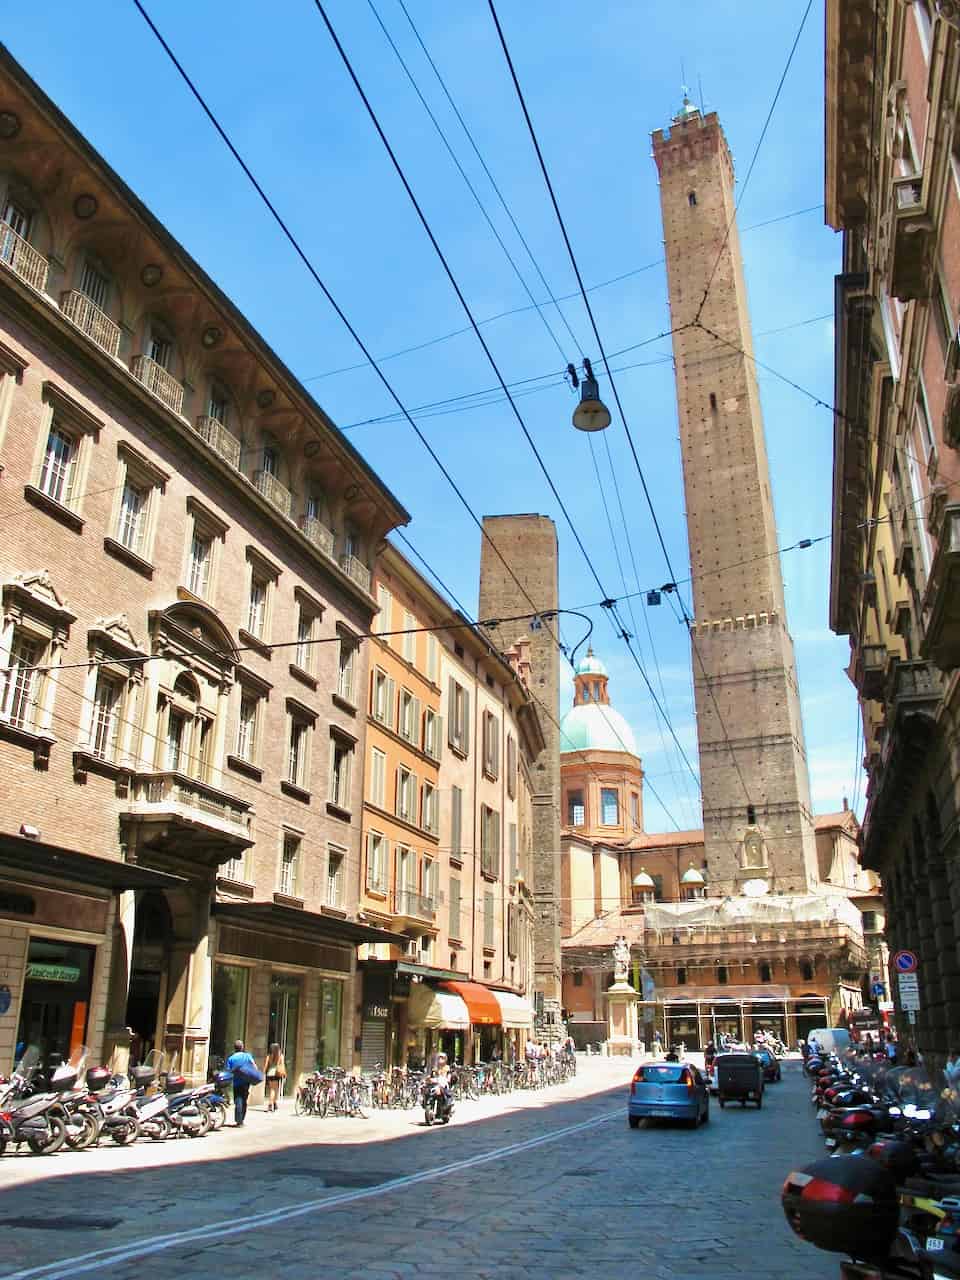 leaning-tower-bologna-italy-photo